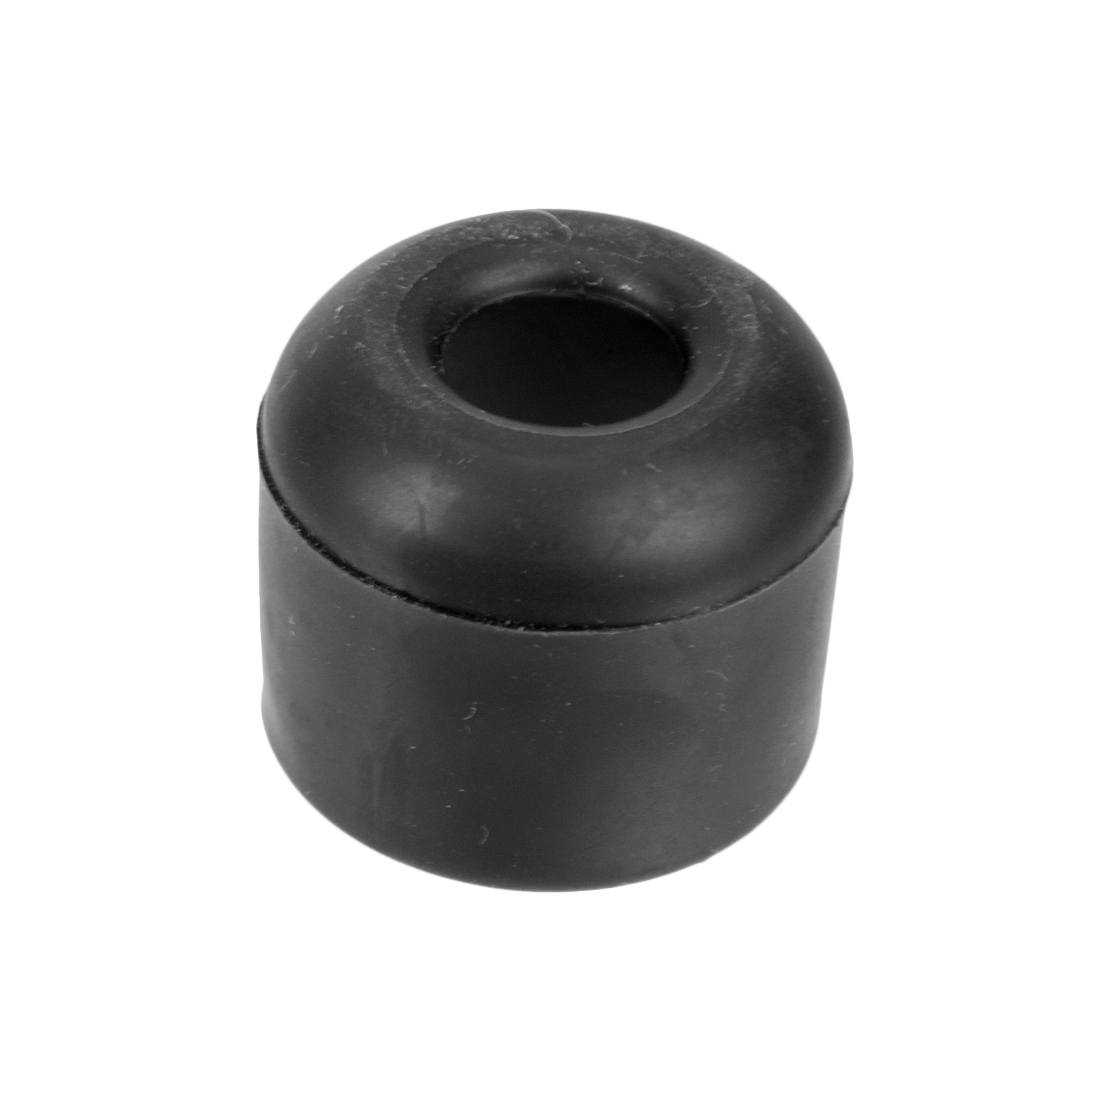 XERO Base Cap - For Plus and Glue-On Style Poles Front View